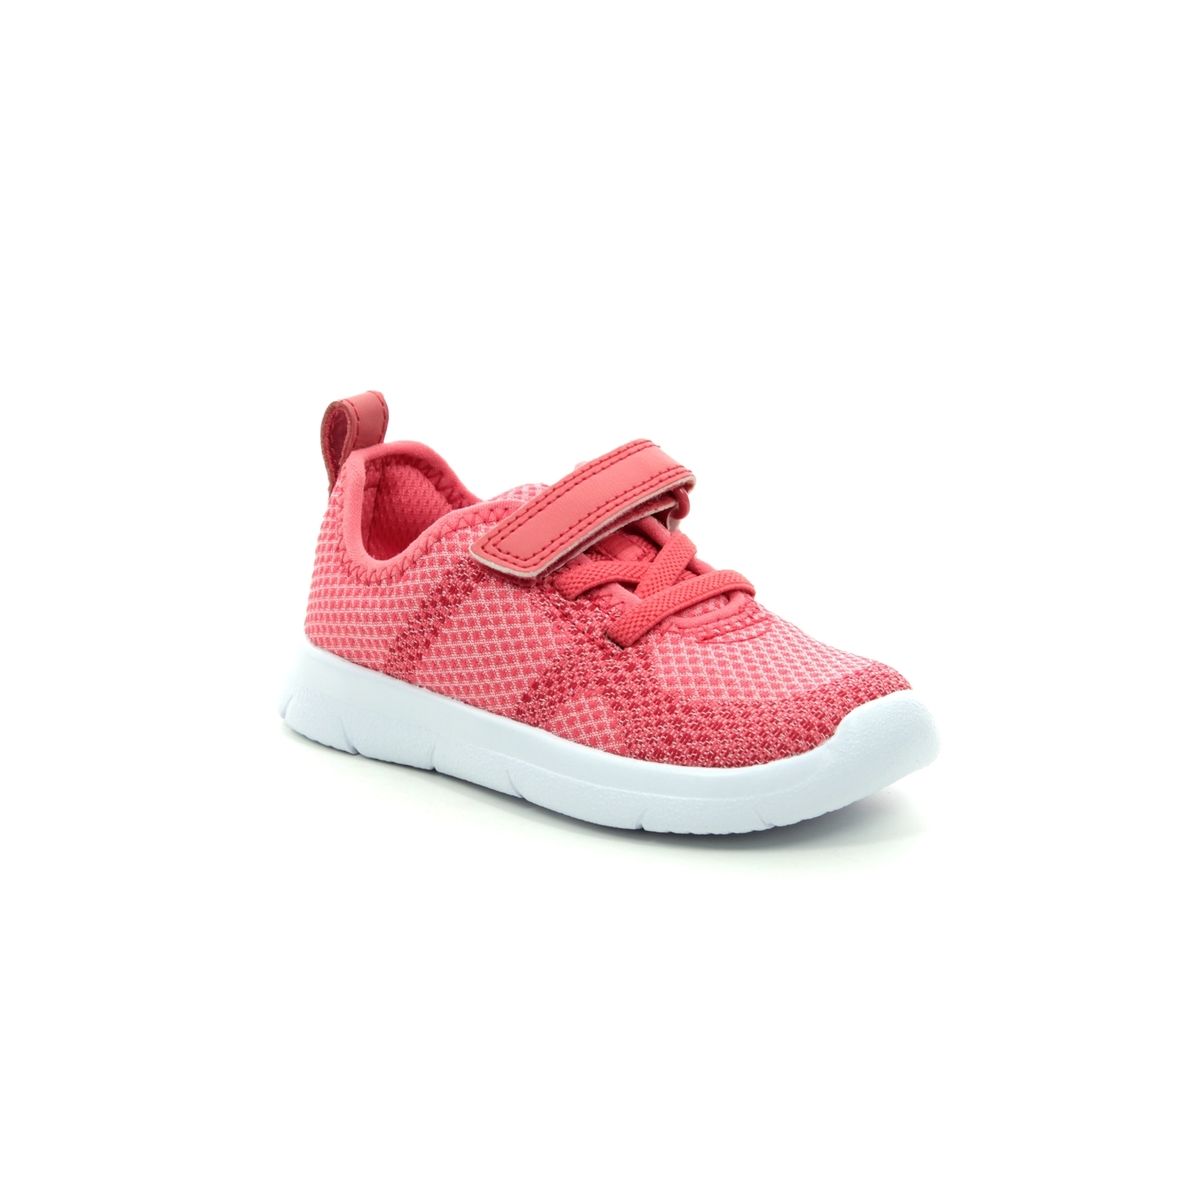 clarks toddler trainers